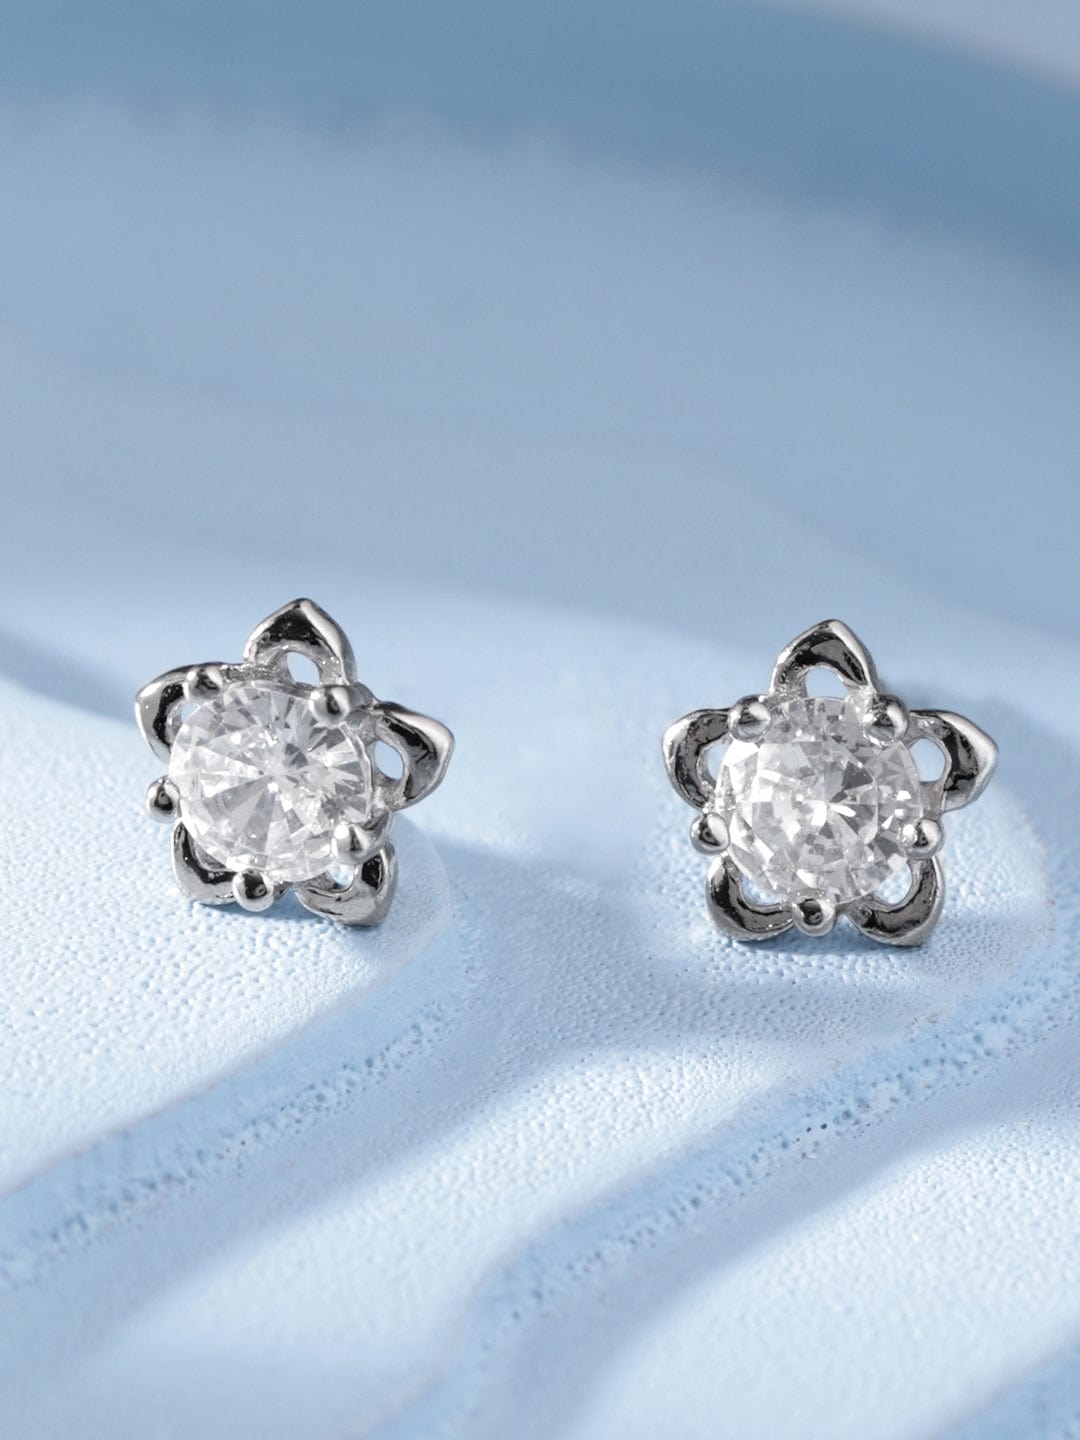 Dainty Silver Stud Earrings with AD Accents Earrings